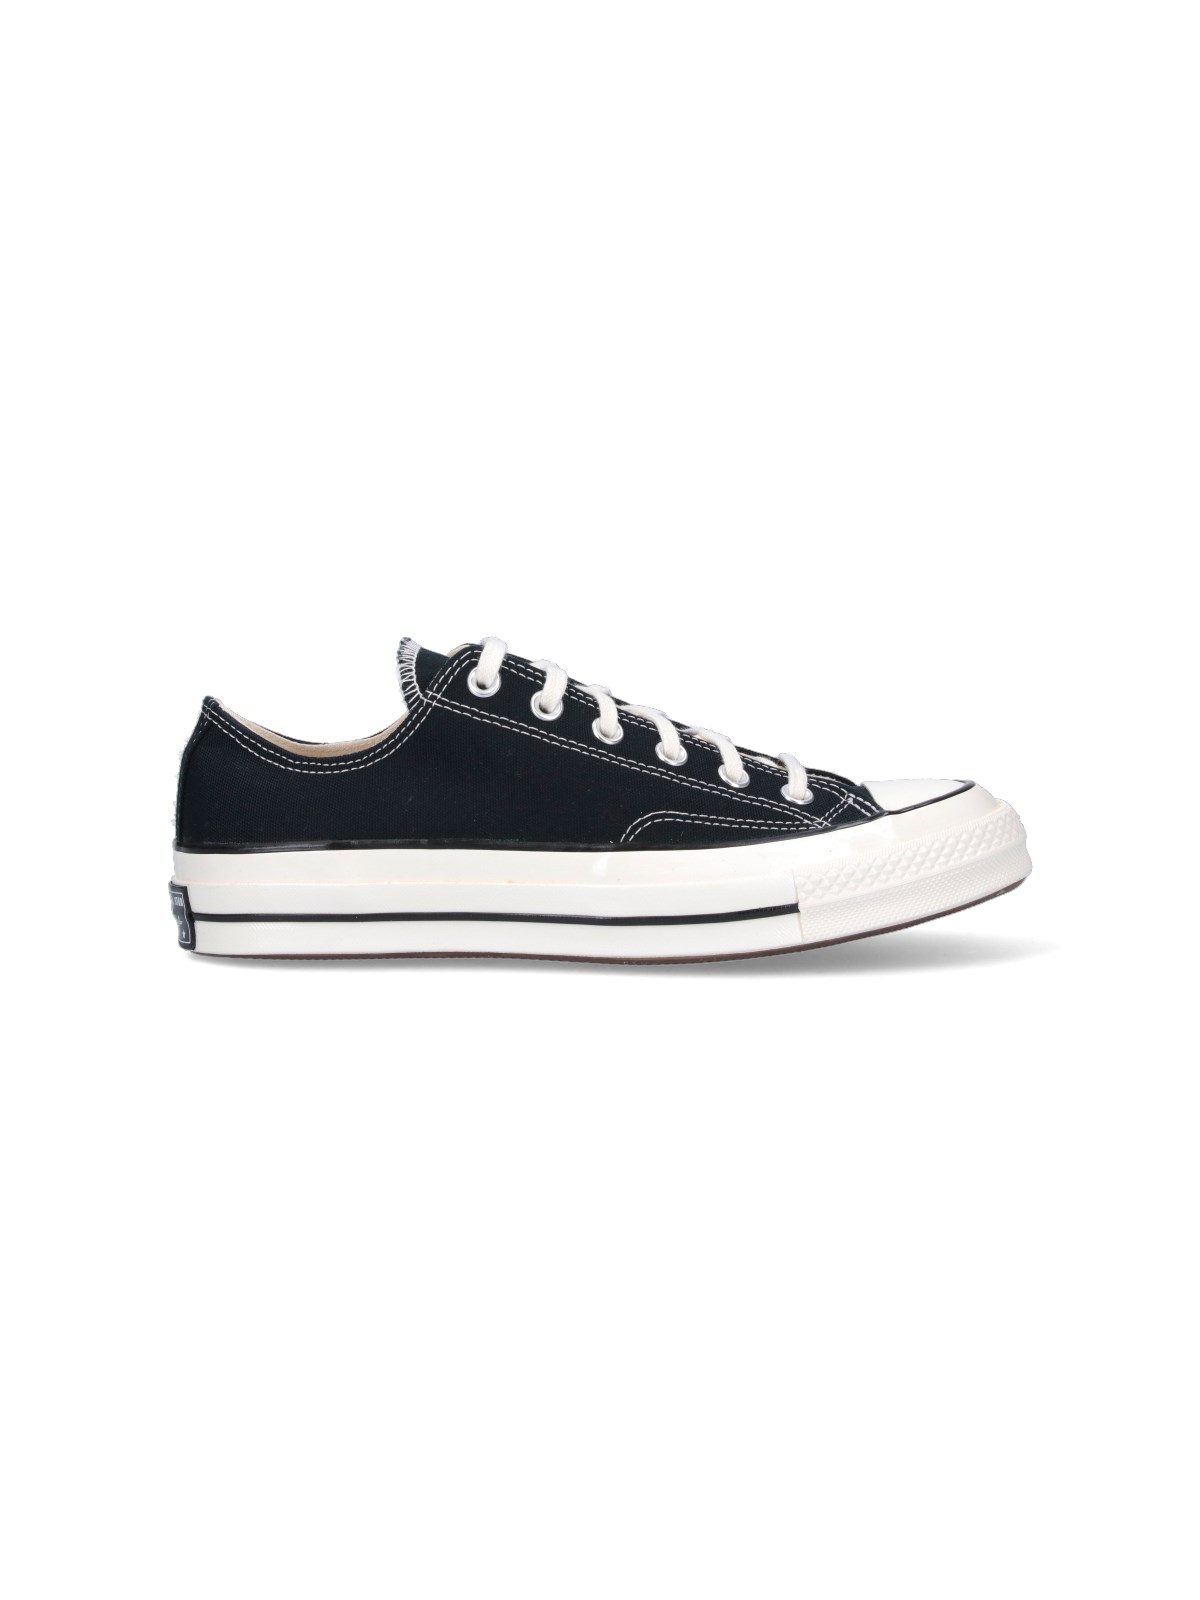 CONVERSE "CHUCK 70" LOW TOP SNEAKERS